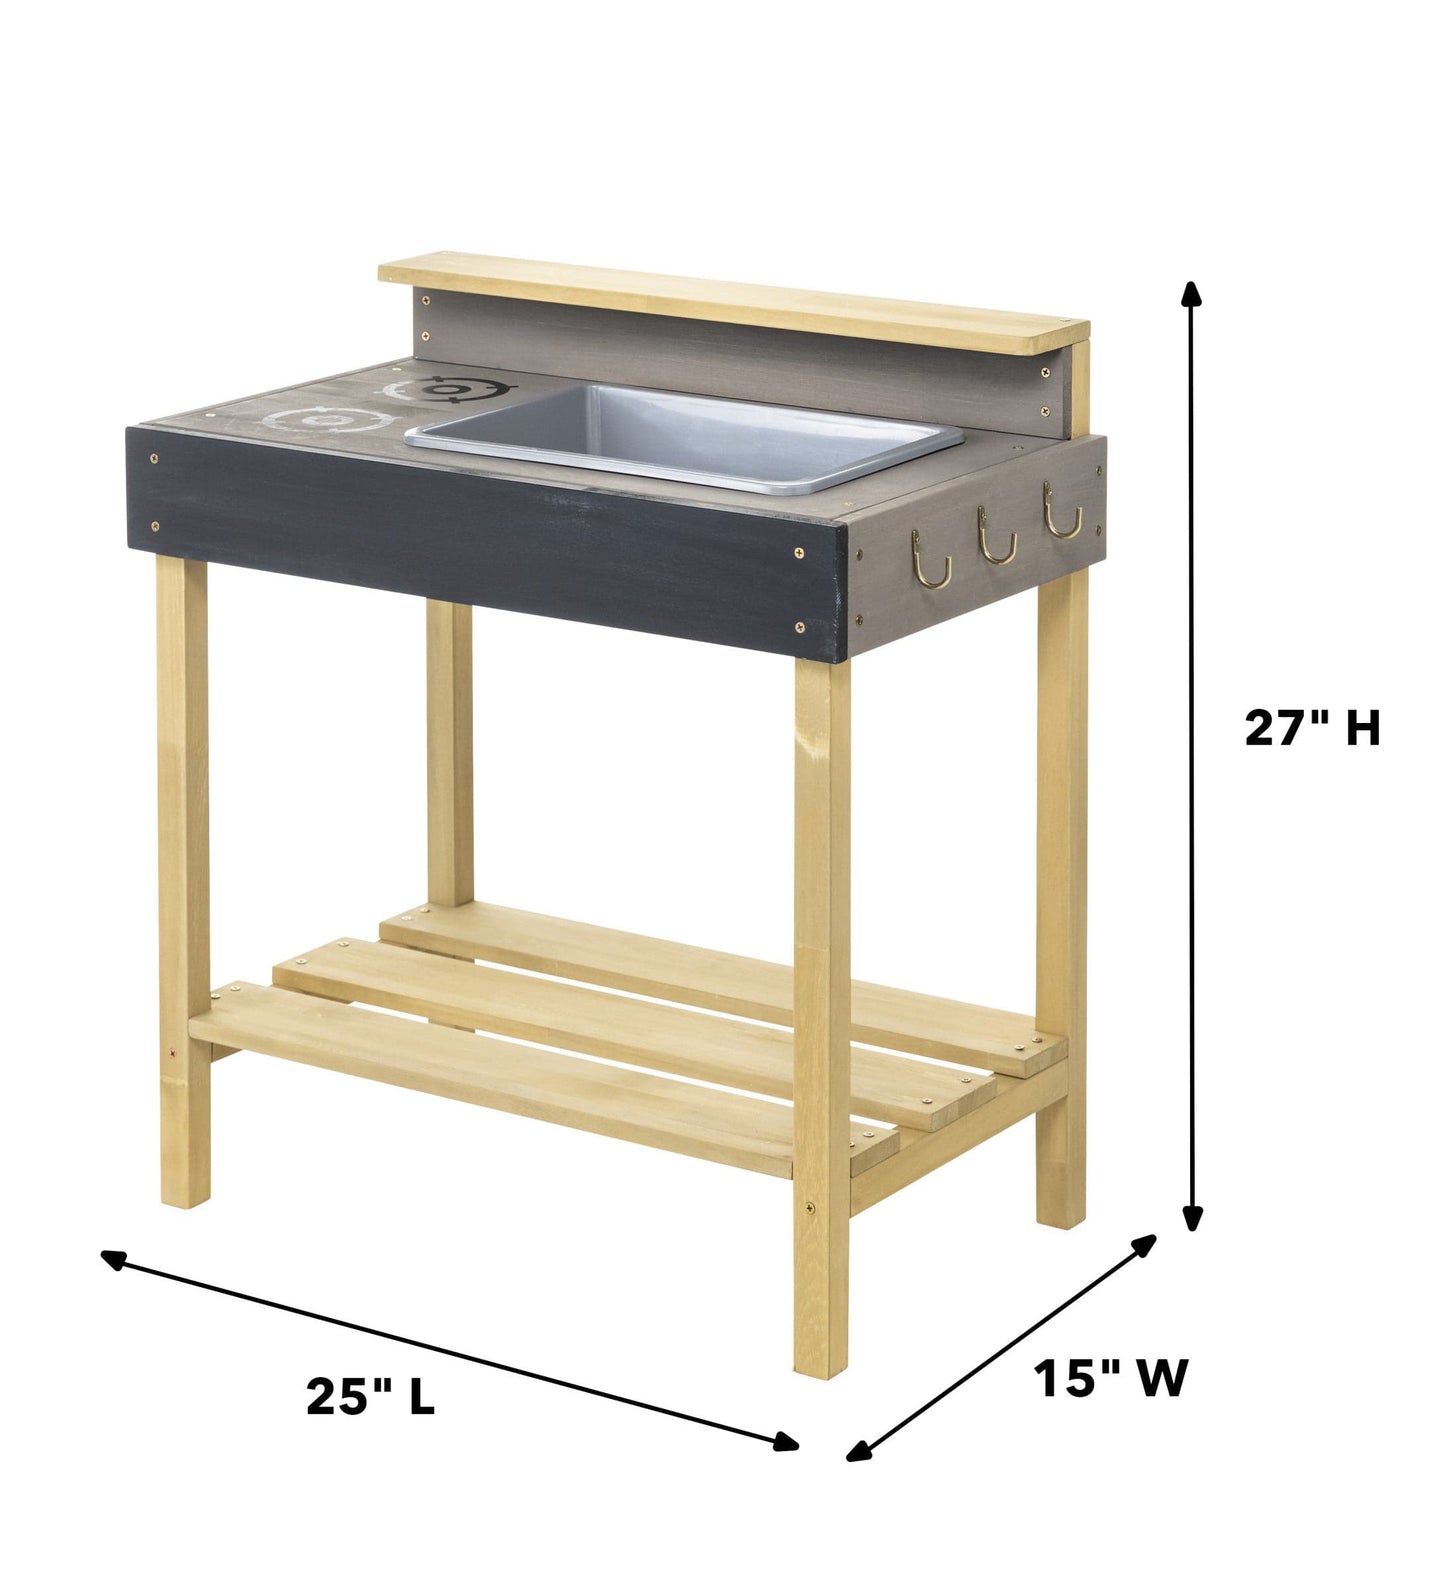 Jr. Chef's Wooden Mud Play Kitchen and Imagination Station with Metal Accessories